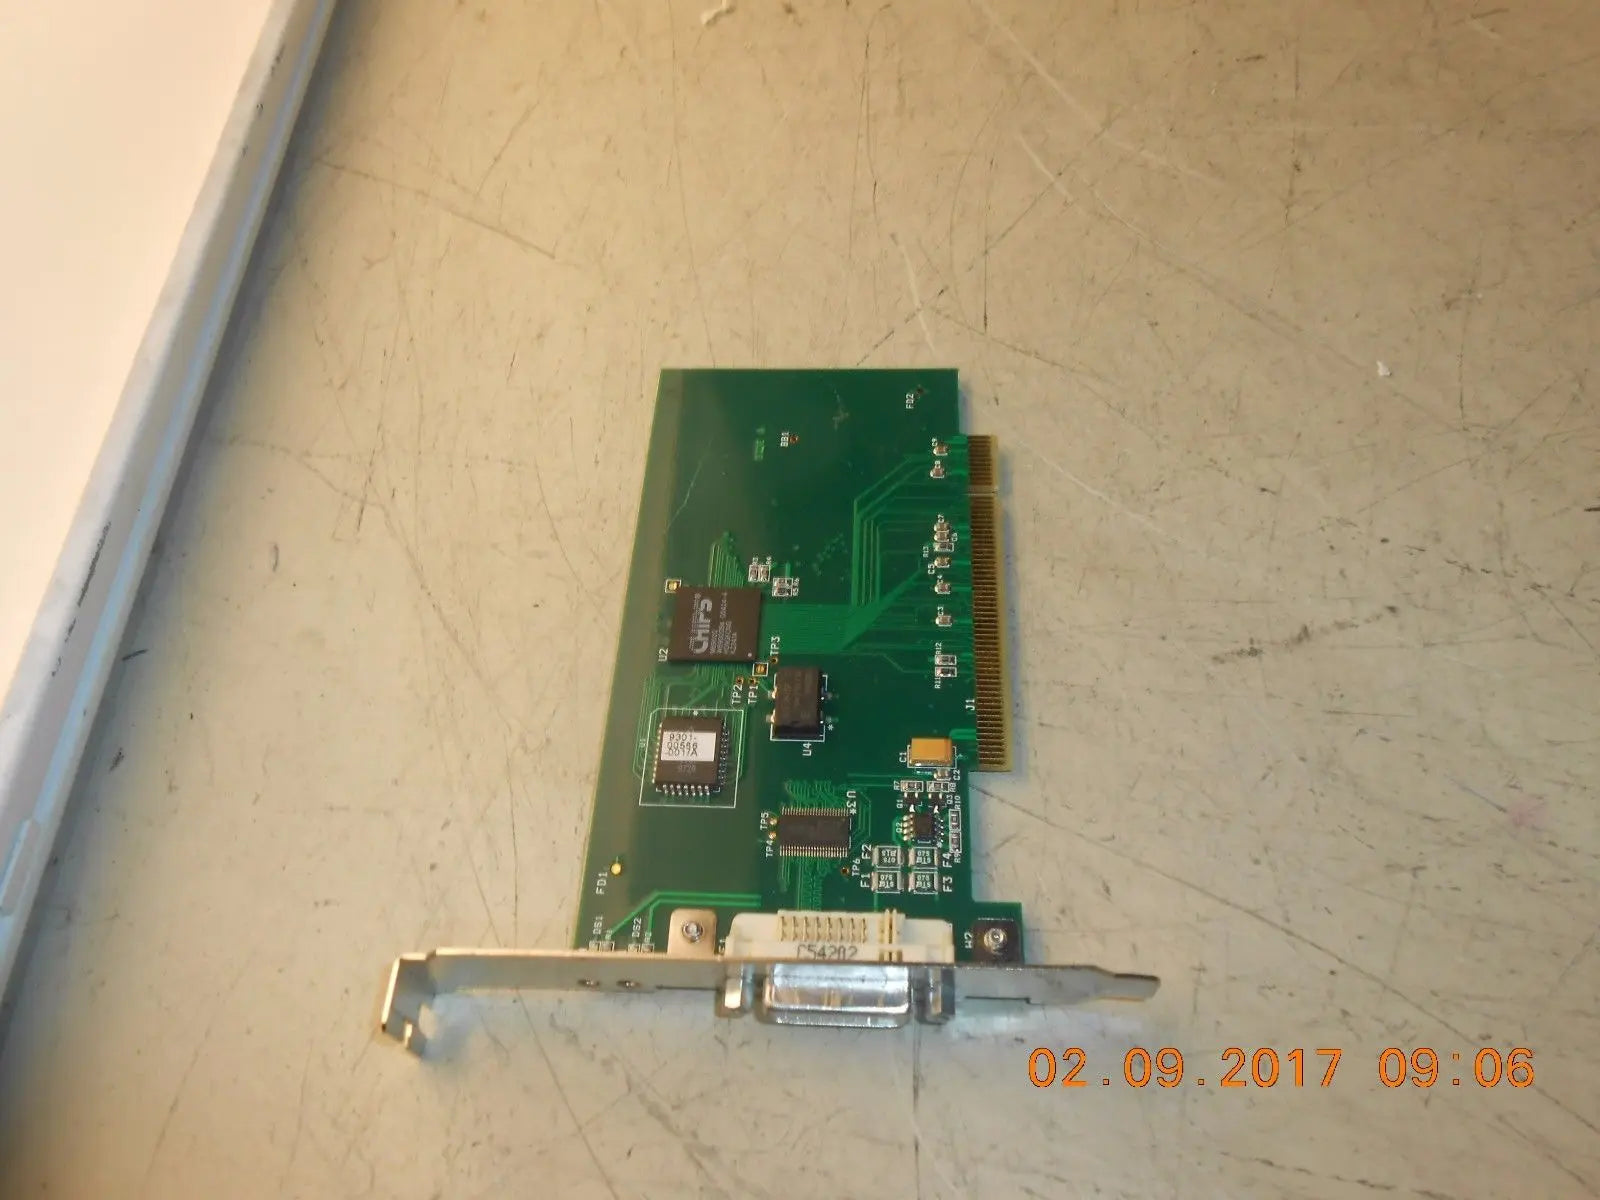 GE Logiq 9 Ultrasound System Card. This item is used DIAGNOSTIC ULTRASOUND MACHINES FOR SALE